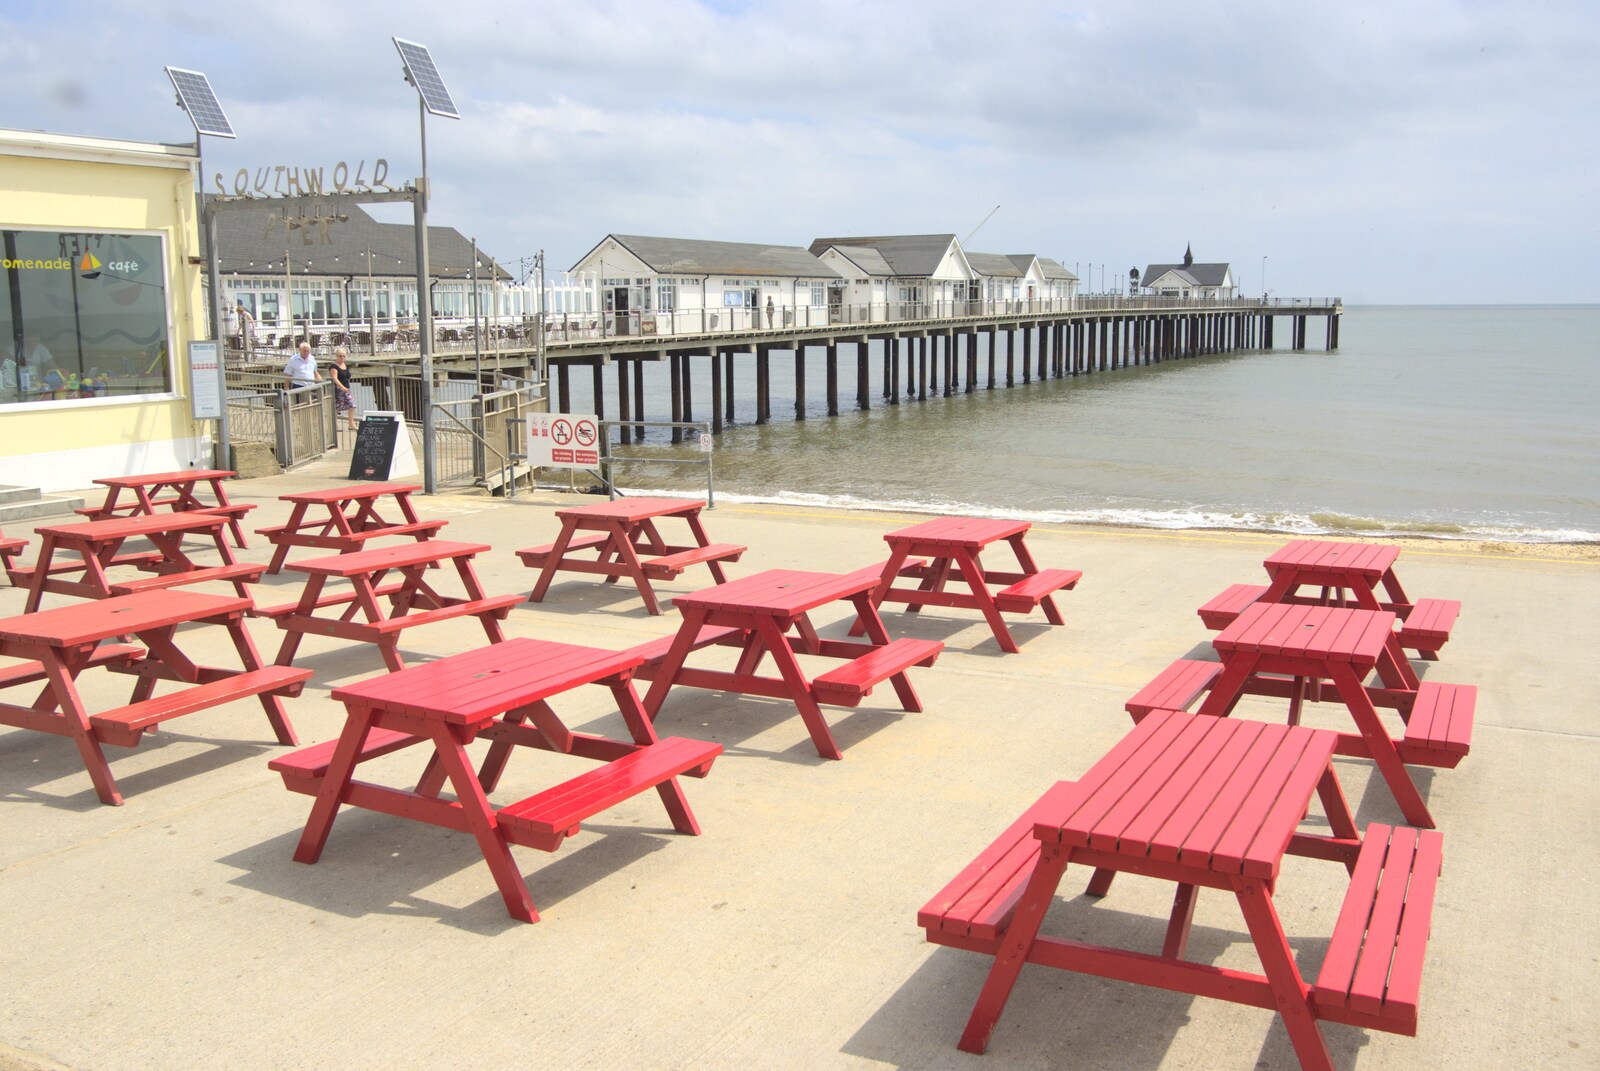 Red benches on the promenade from A "Minimoon" and an Adnams Brewery Trip, Southwold, Suffolk - 7th July 2010